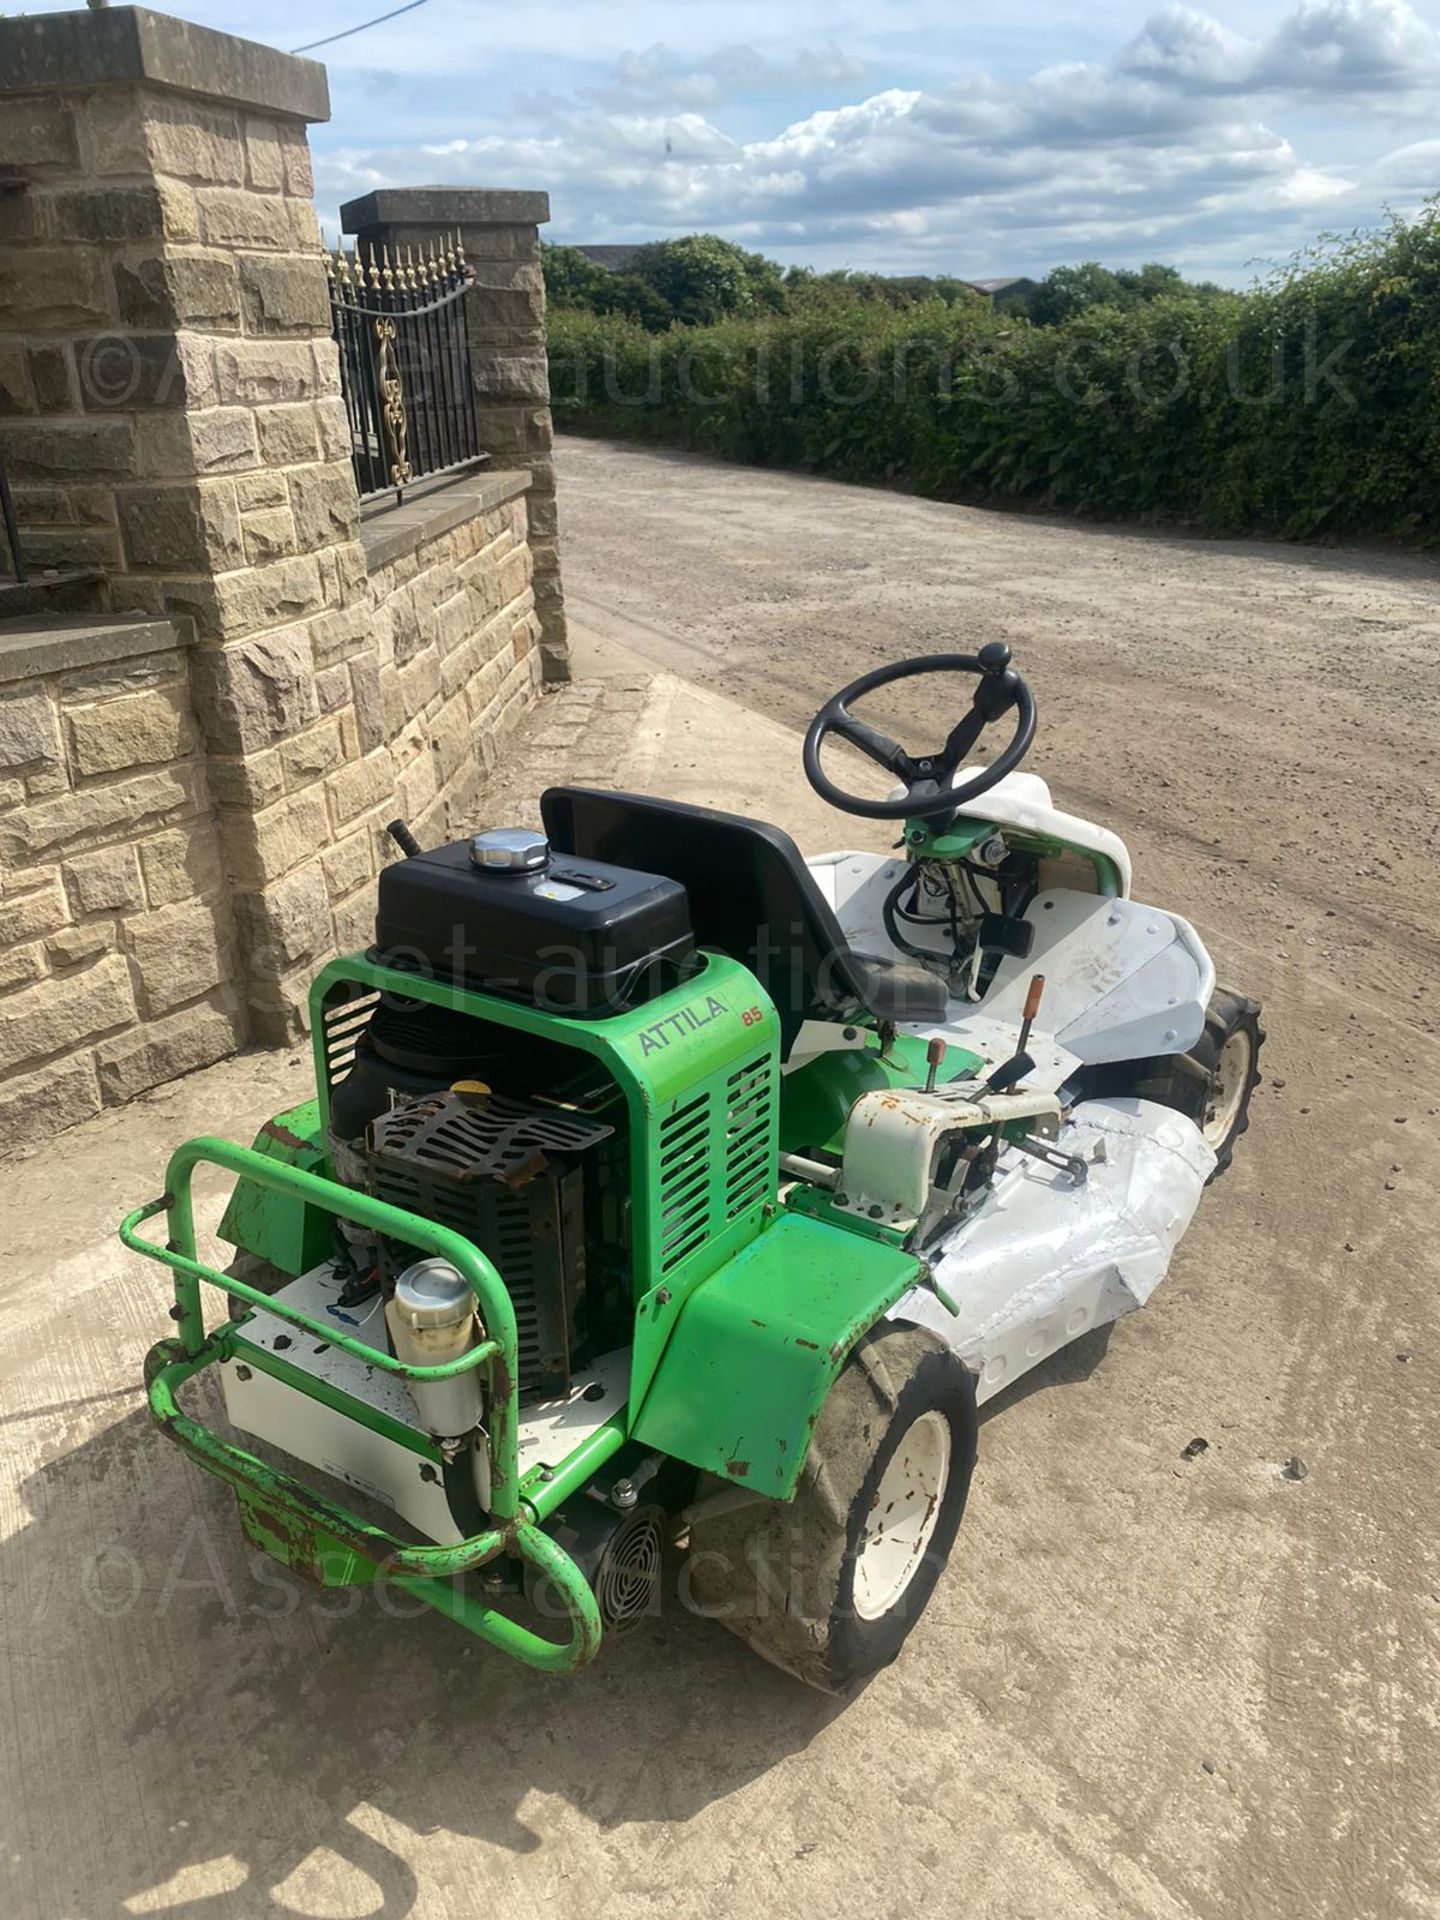 ETESIA ATTILA 85 BANK MOWER, STARTS AND RUNS, HOURS ARE SHOWING 554 *NO VAT* - Image 4 of 12